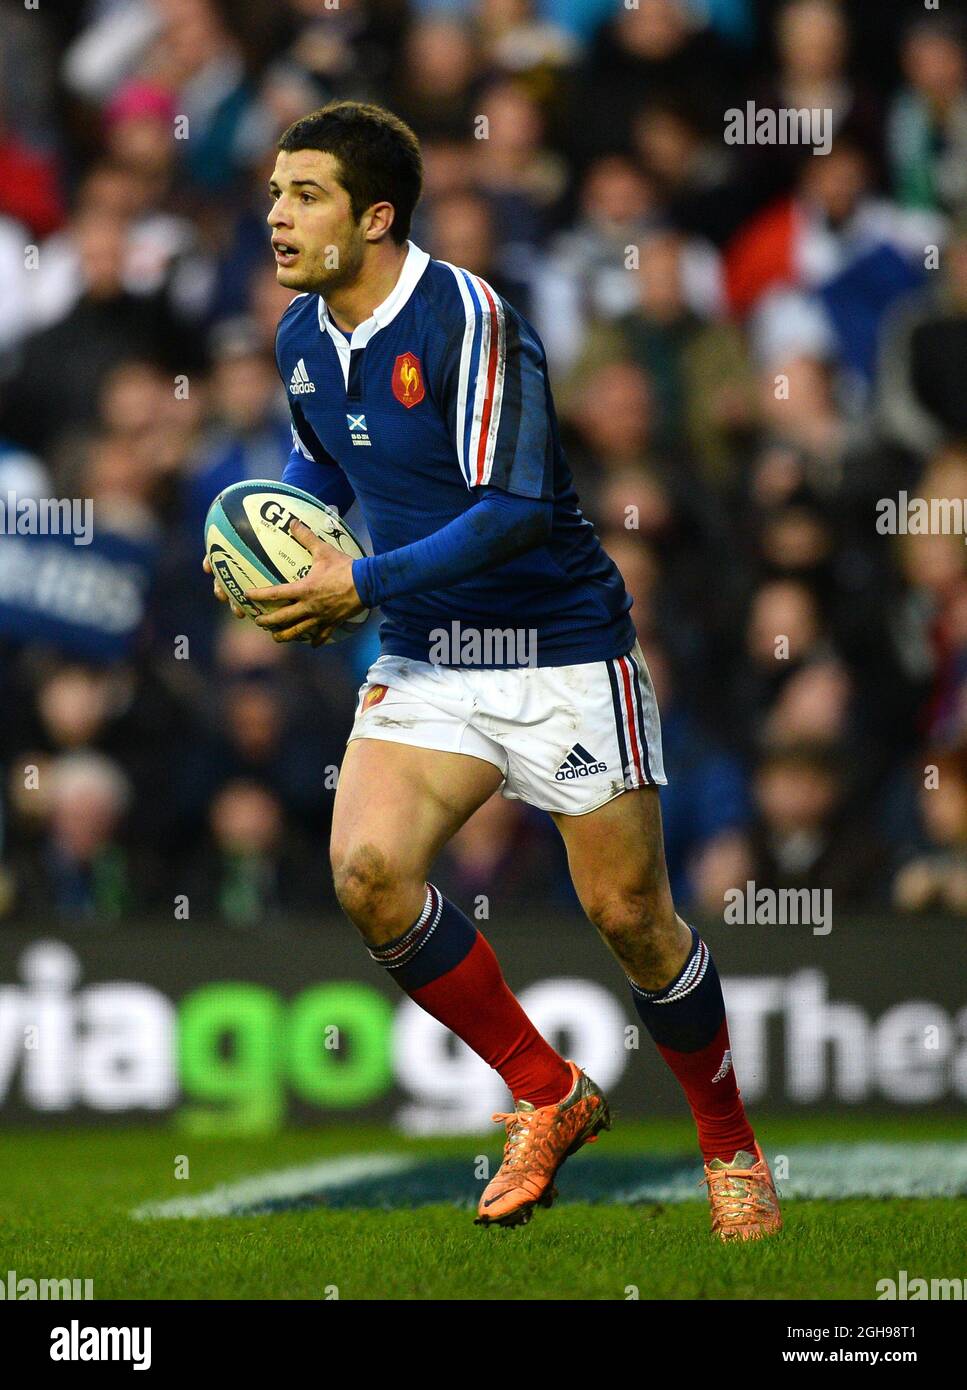 Brice Dulin of France during the RBS 6Nations between Scotland and France at the Murrayfield Stadium in Edinburgh, Scotland on March 8, 2014. Pic: Simon Bellis Stock Photo